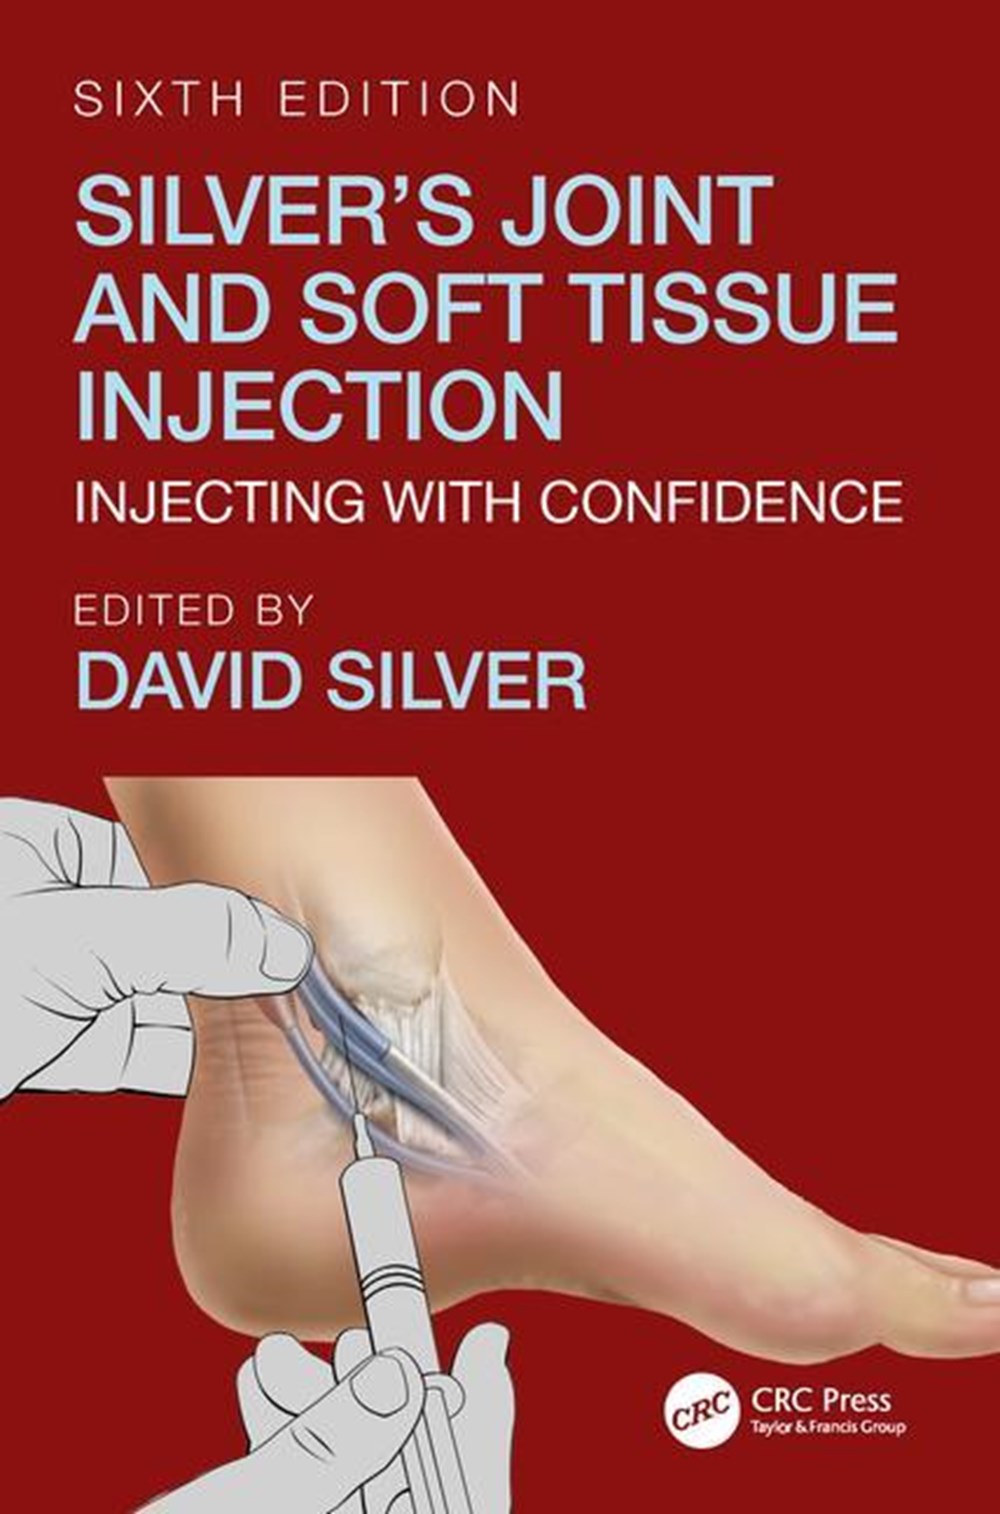 Silver's Joint and Soft Tissue Injection: Injecting with Confidence, Sixth Edition